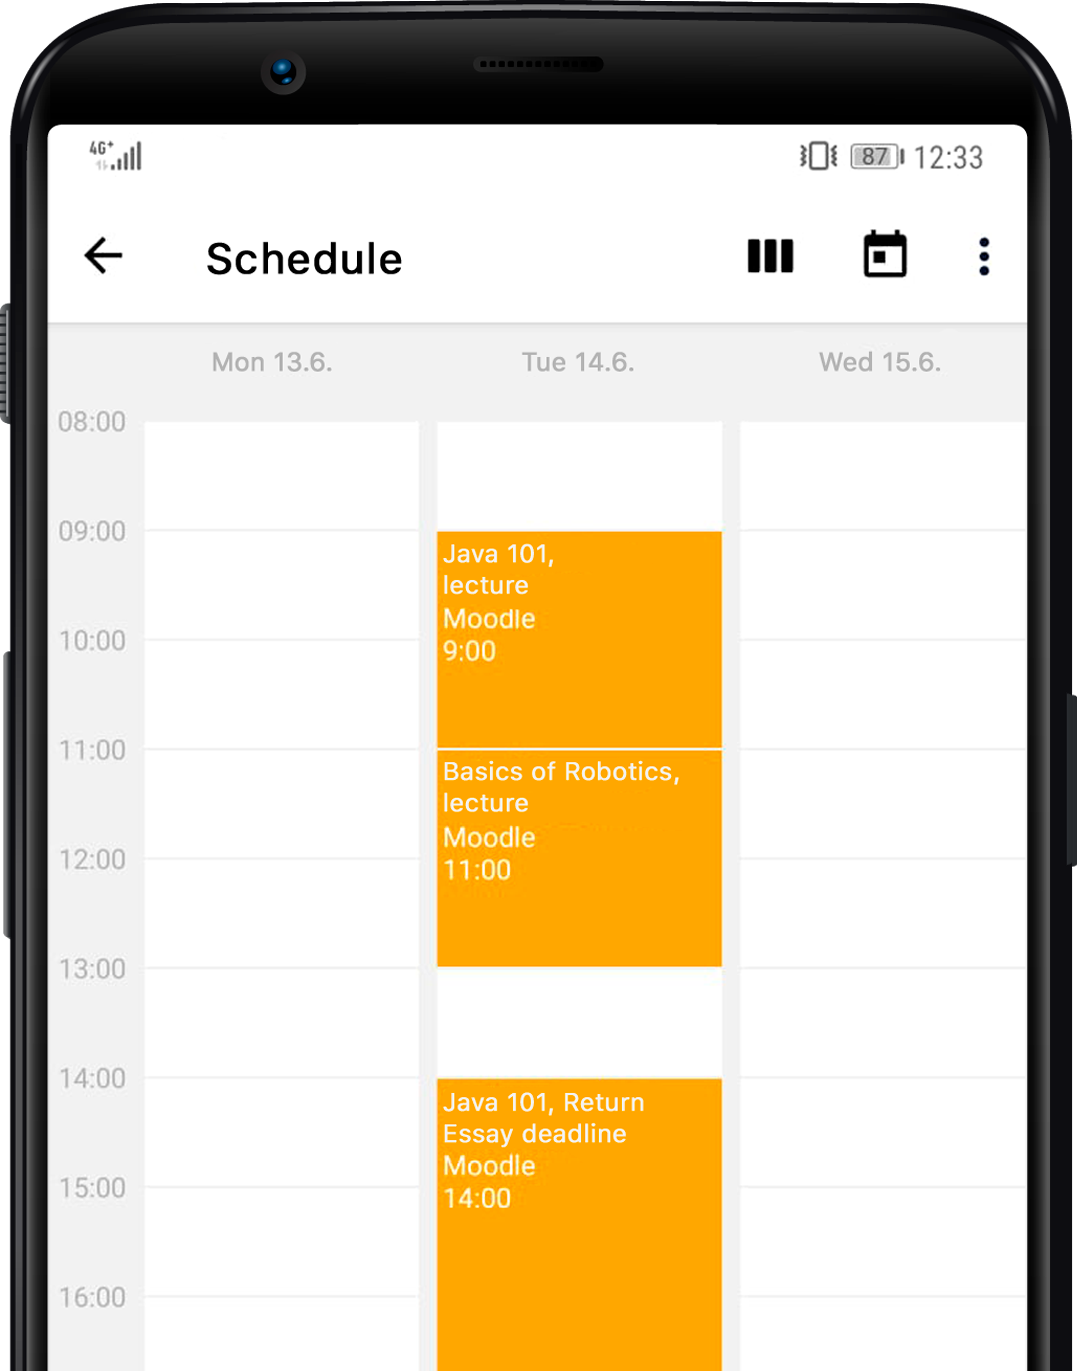 Moodle events on Tuudo's schedule